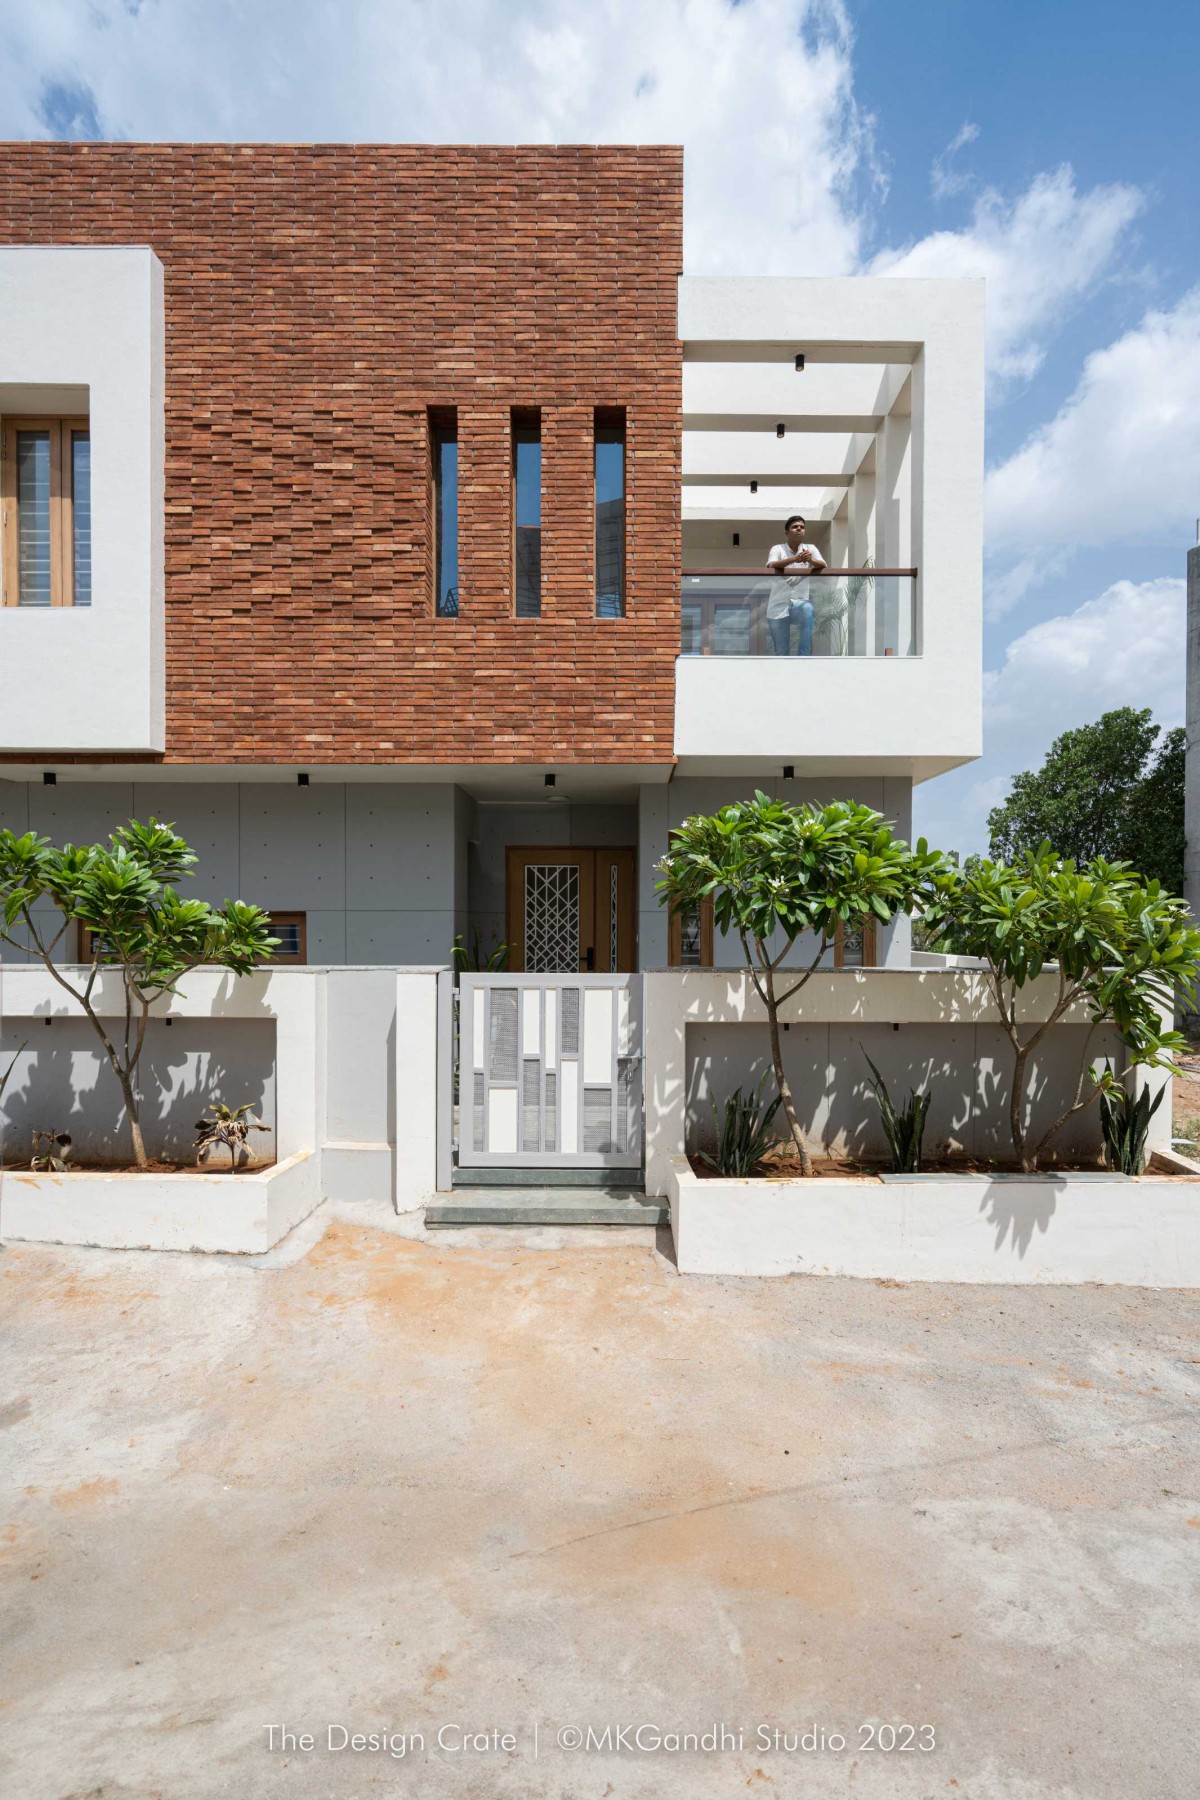 Exterior View Of Nandalay Residence by The Design Crate